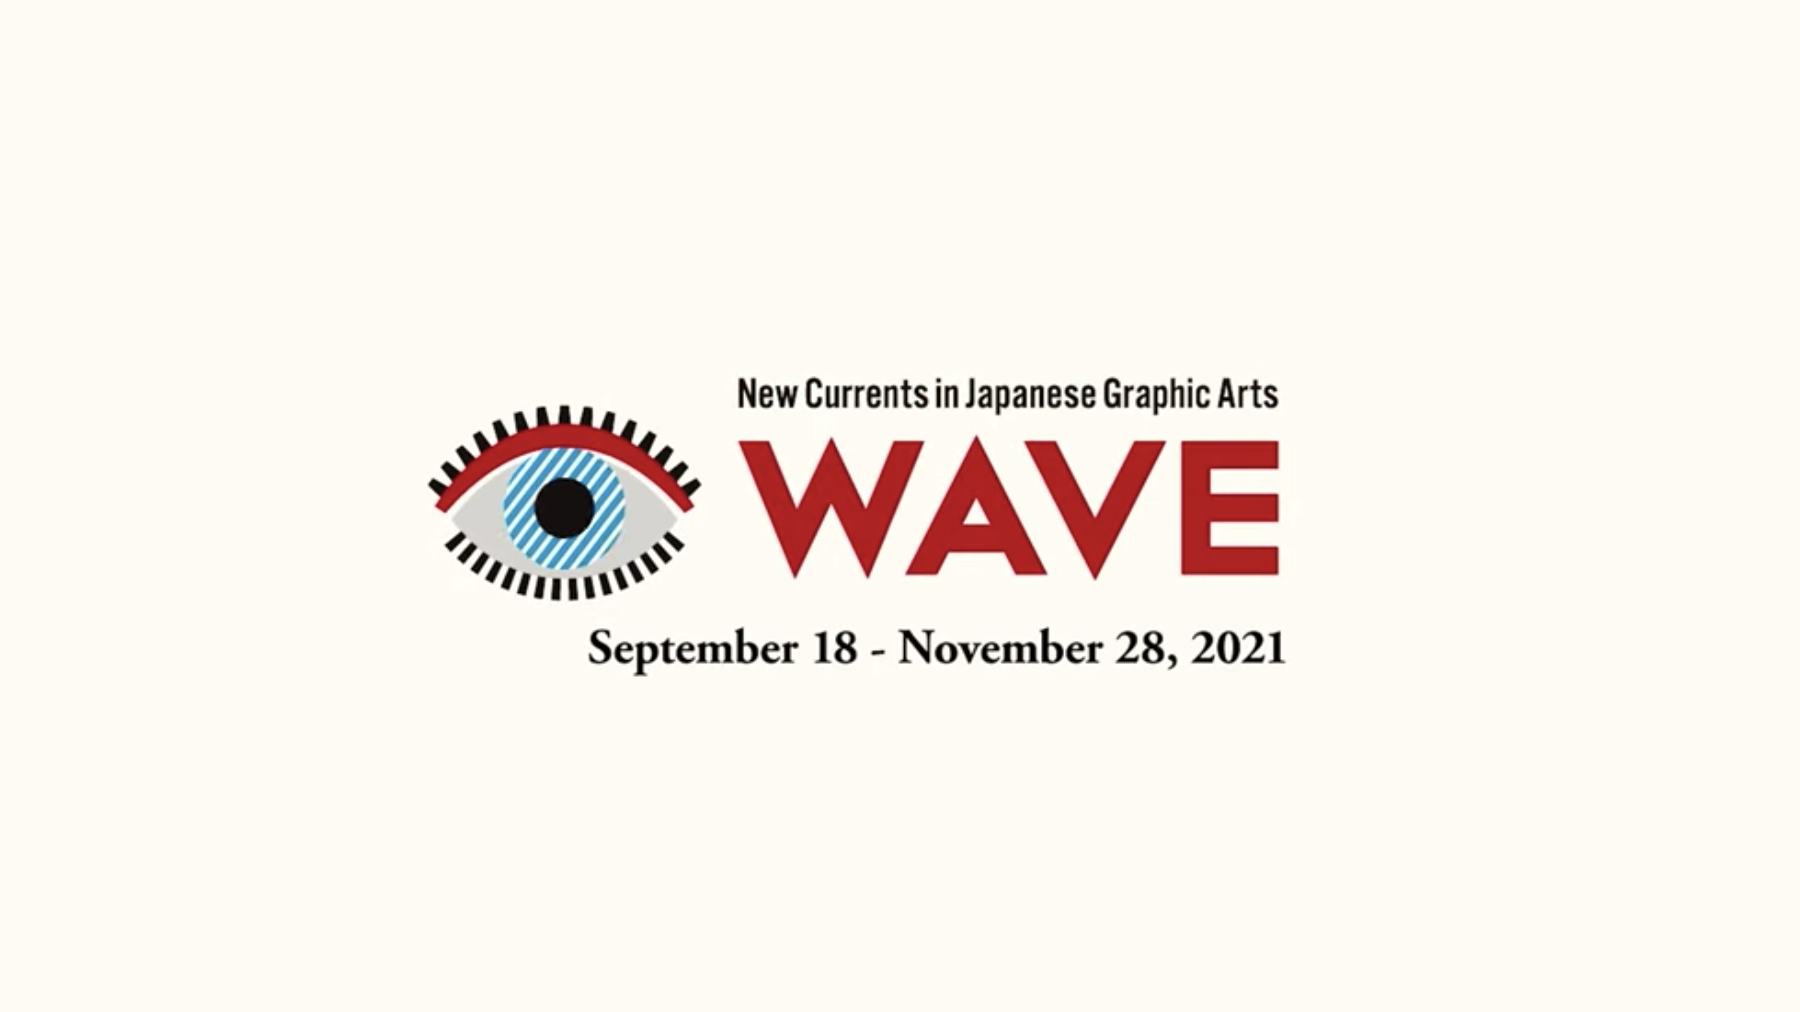 WAVE - New Currents in Japanese Graphic Arts, September 18 - November 28, 2021